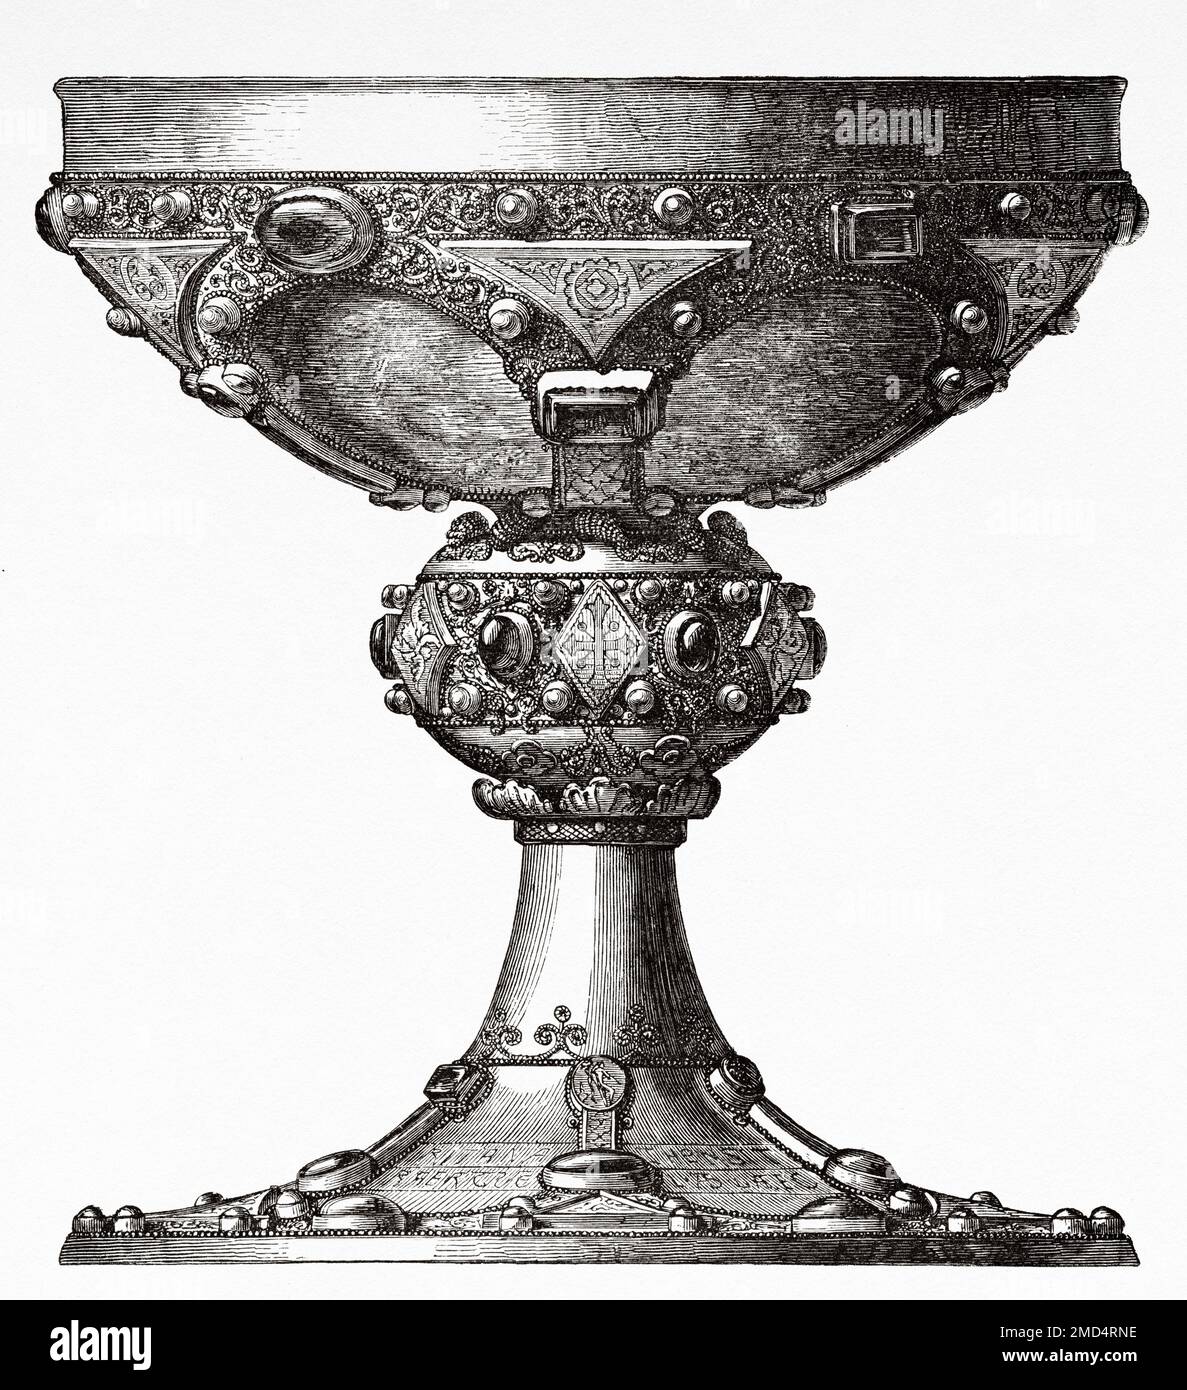 Chalice called San Remy, XII century. Reims Cathedral Treasury, France. The Arts of the Middle Ages and at the Period of the Renaissance by Paul Lacroix, 1874 Stock Photo